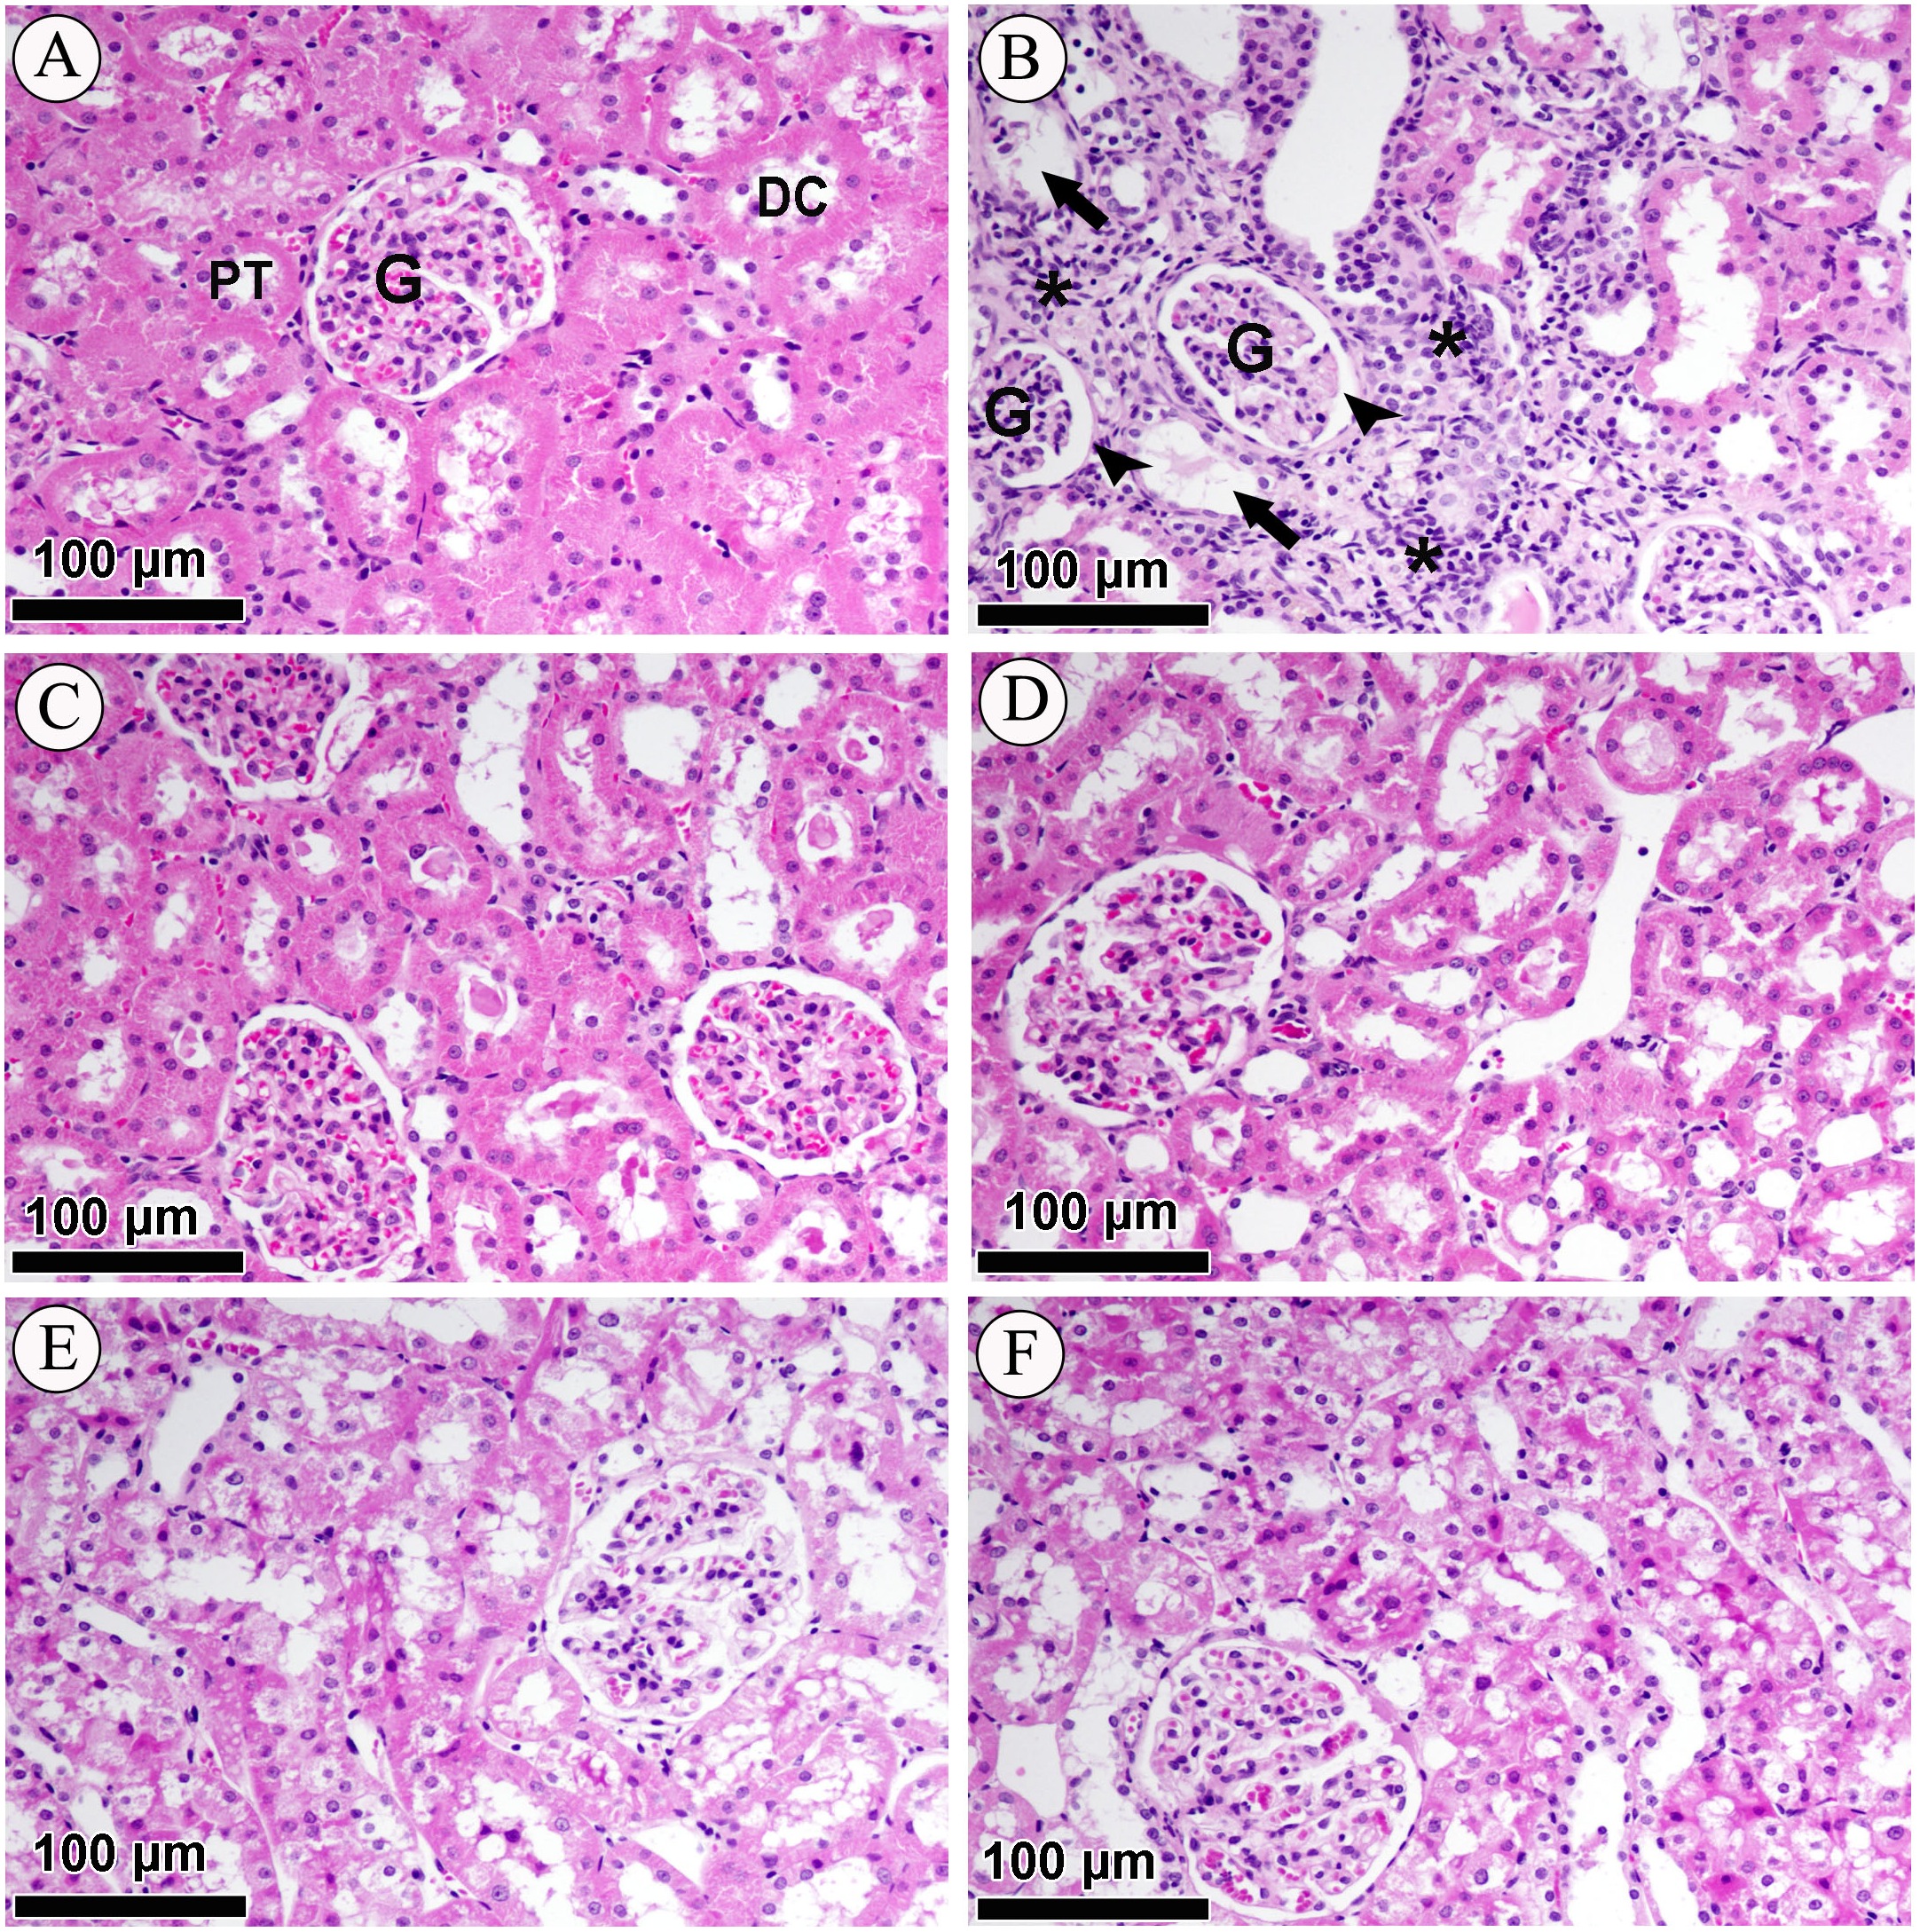 LCZ696 mitigates diabetic-induced nephropathy through inhibiting oxidative  stress, NF-κB mediated inflammation and glomerulosclerosis in rats [PeerJ]